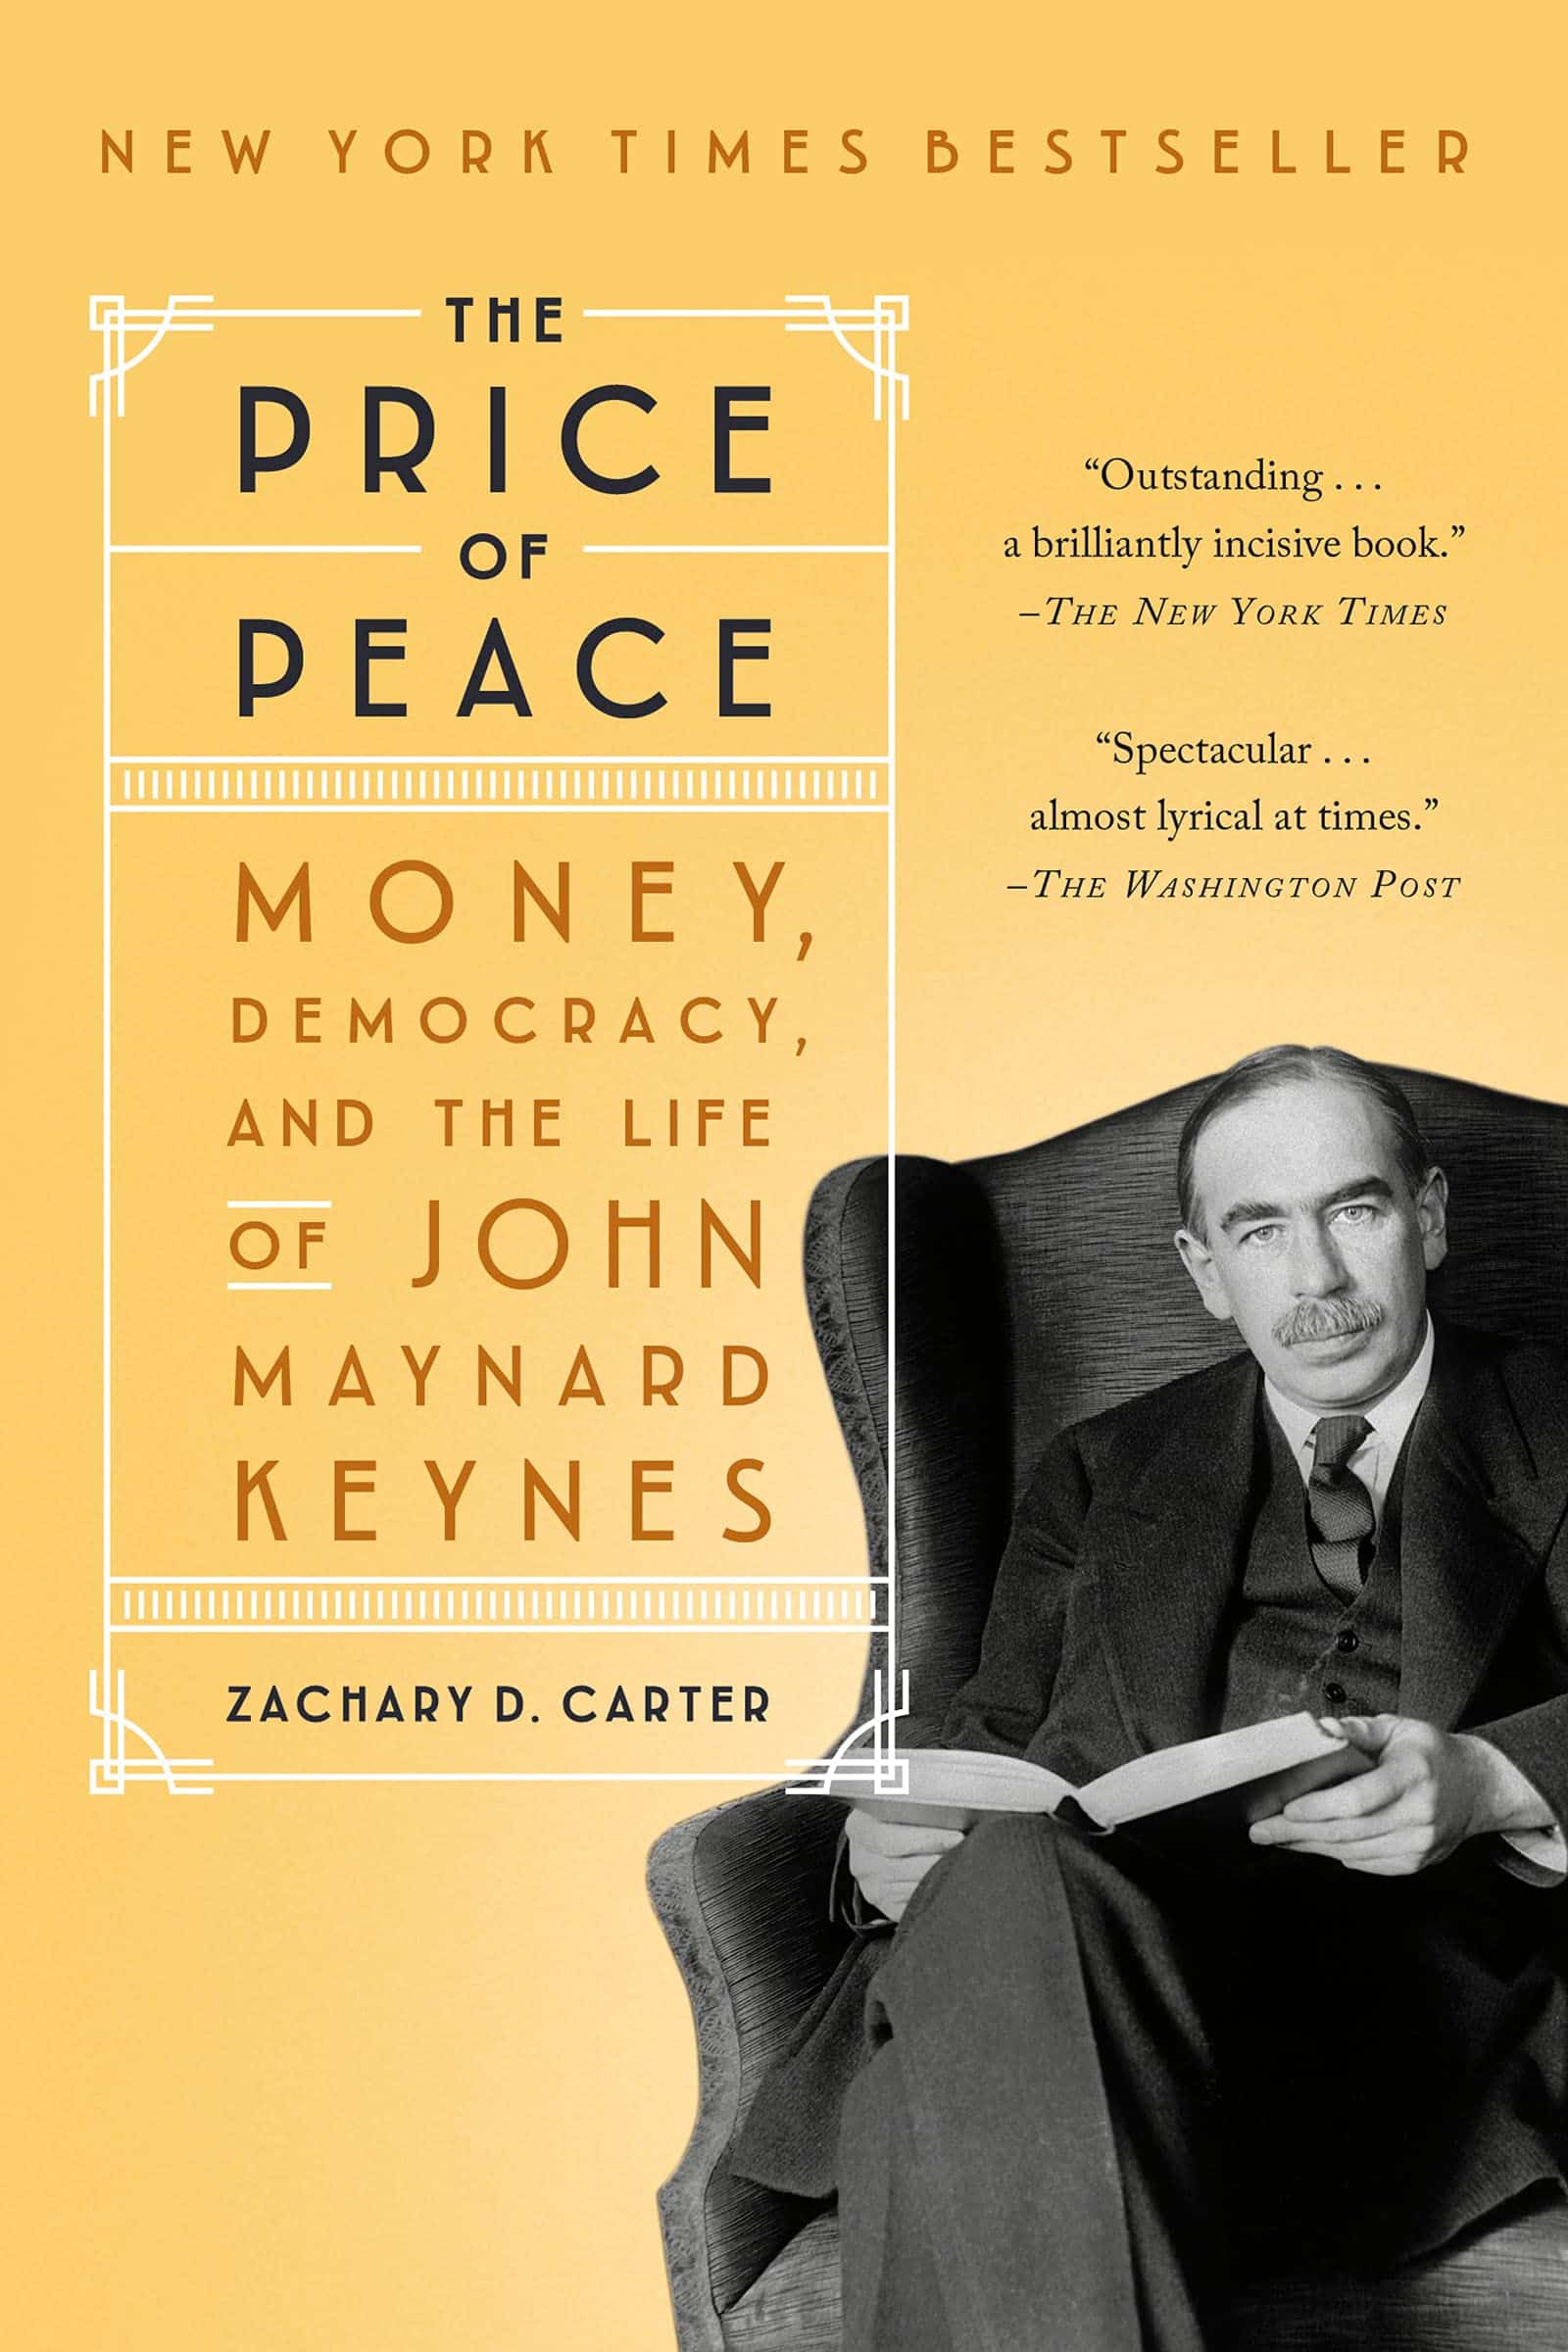 The cover of The Price of Peace